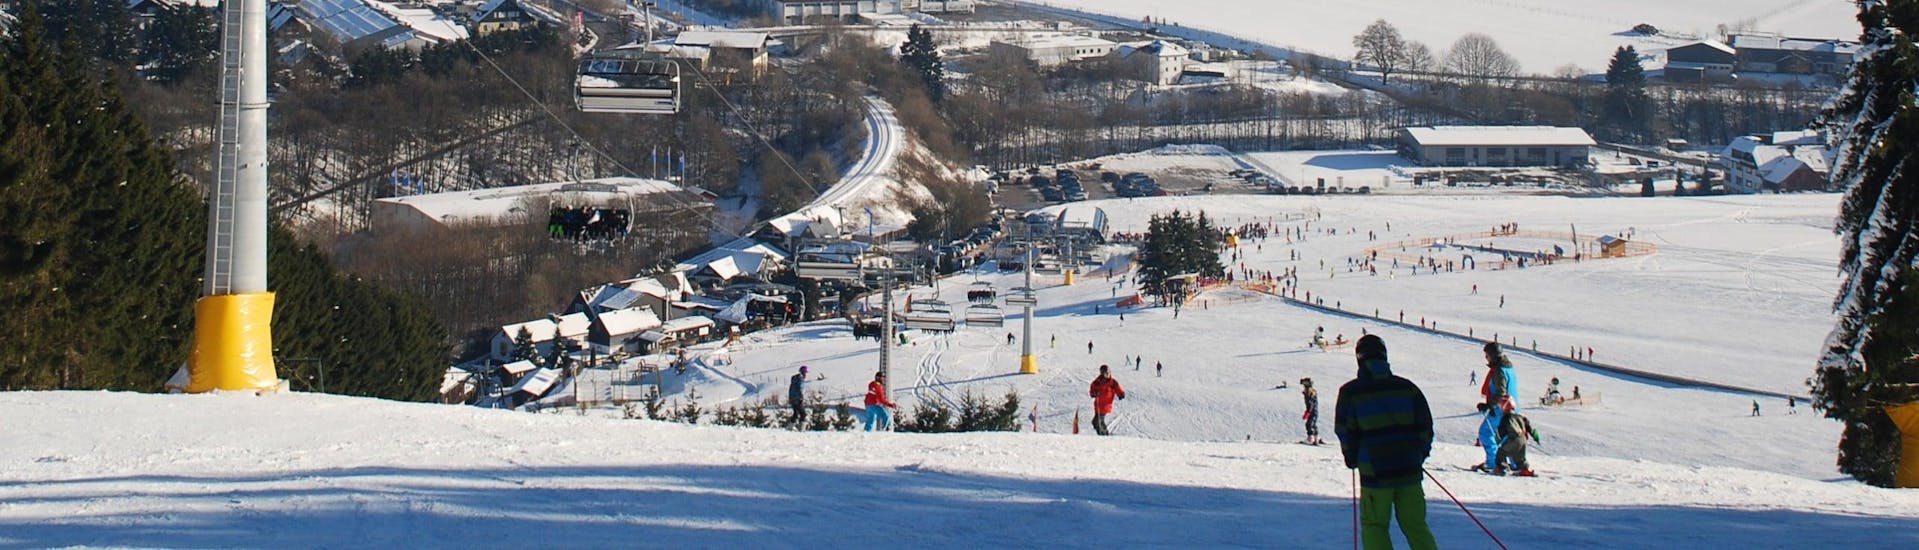 An image of a chair lift carrying skiers up the mountain in the ski resort of Willingen, where local ski schools offer ski lessons to skiing enthusiasts of all levels.